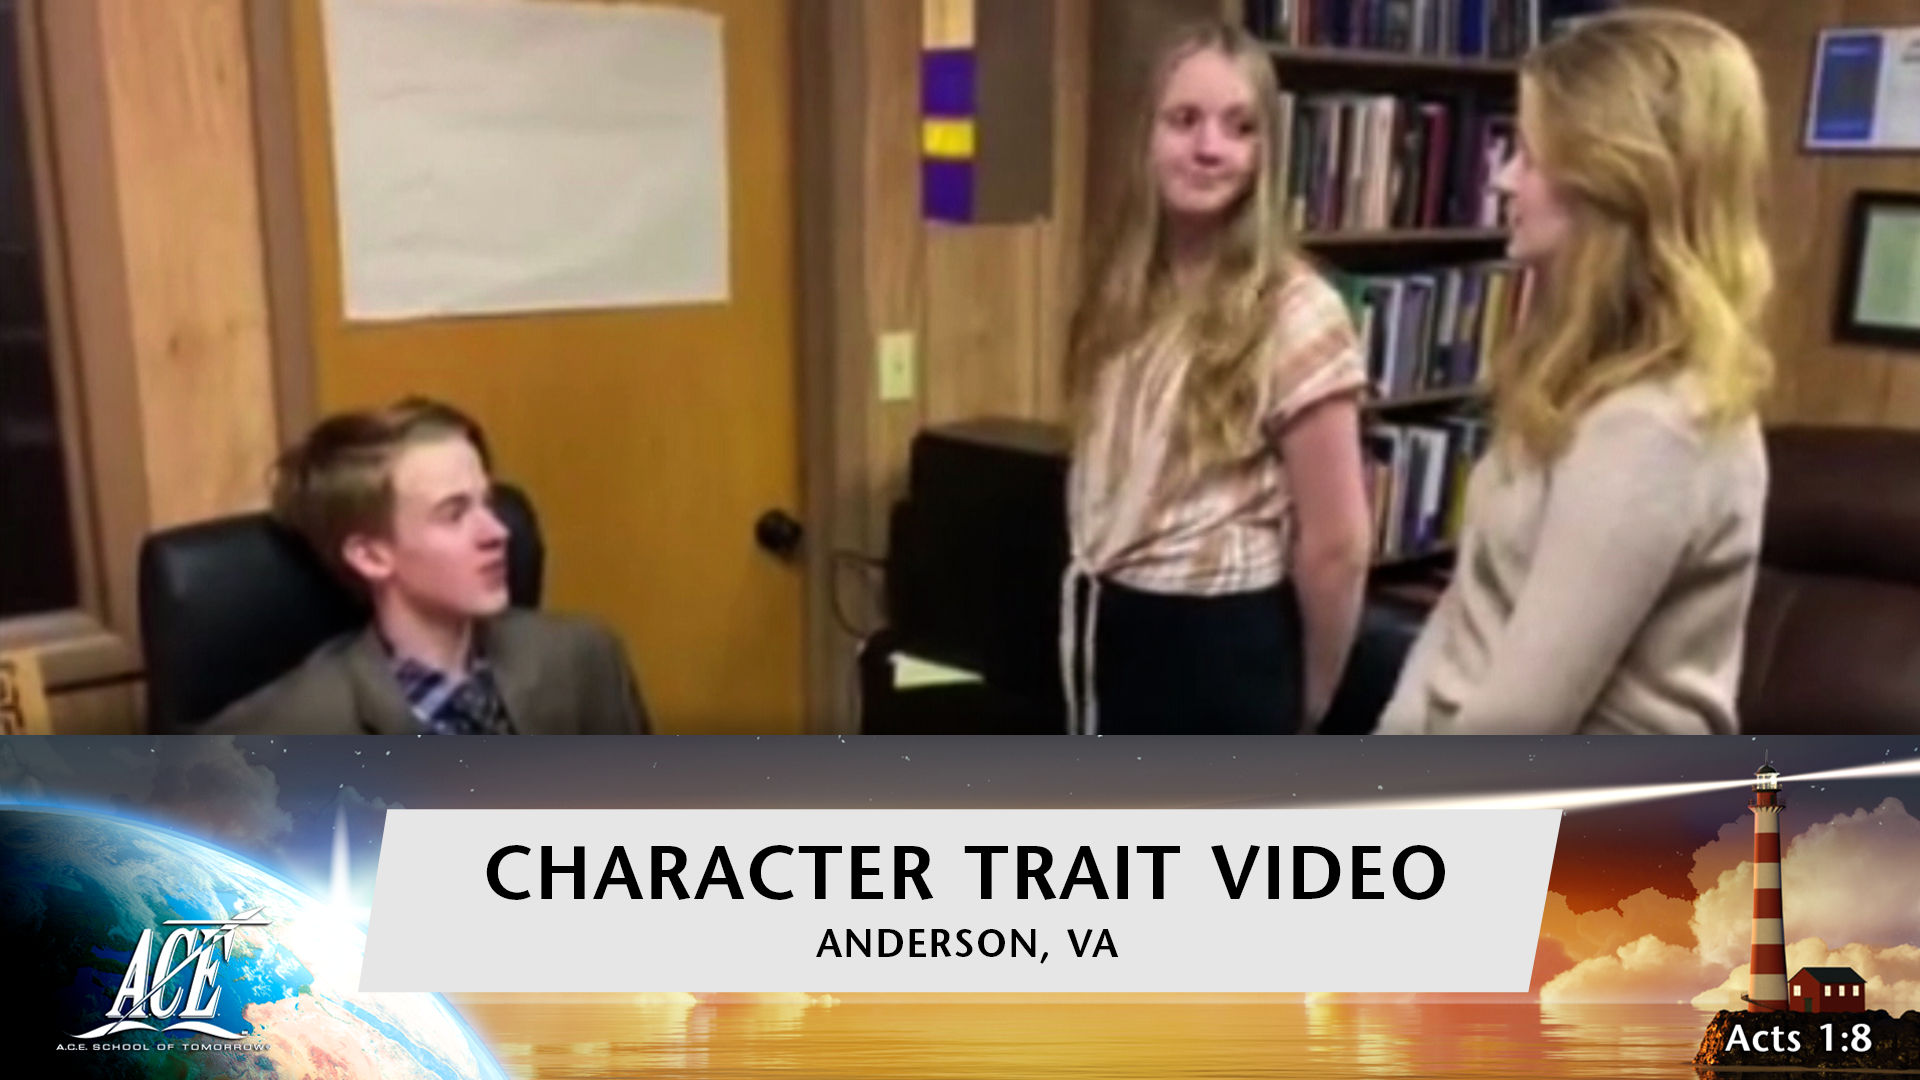 Character Trait Video, "Courageous" - ISC 2022